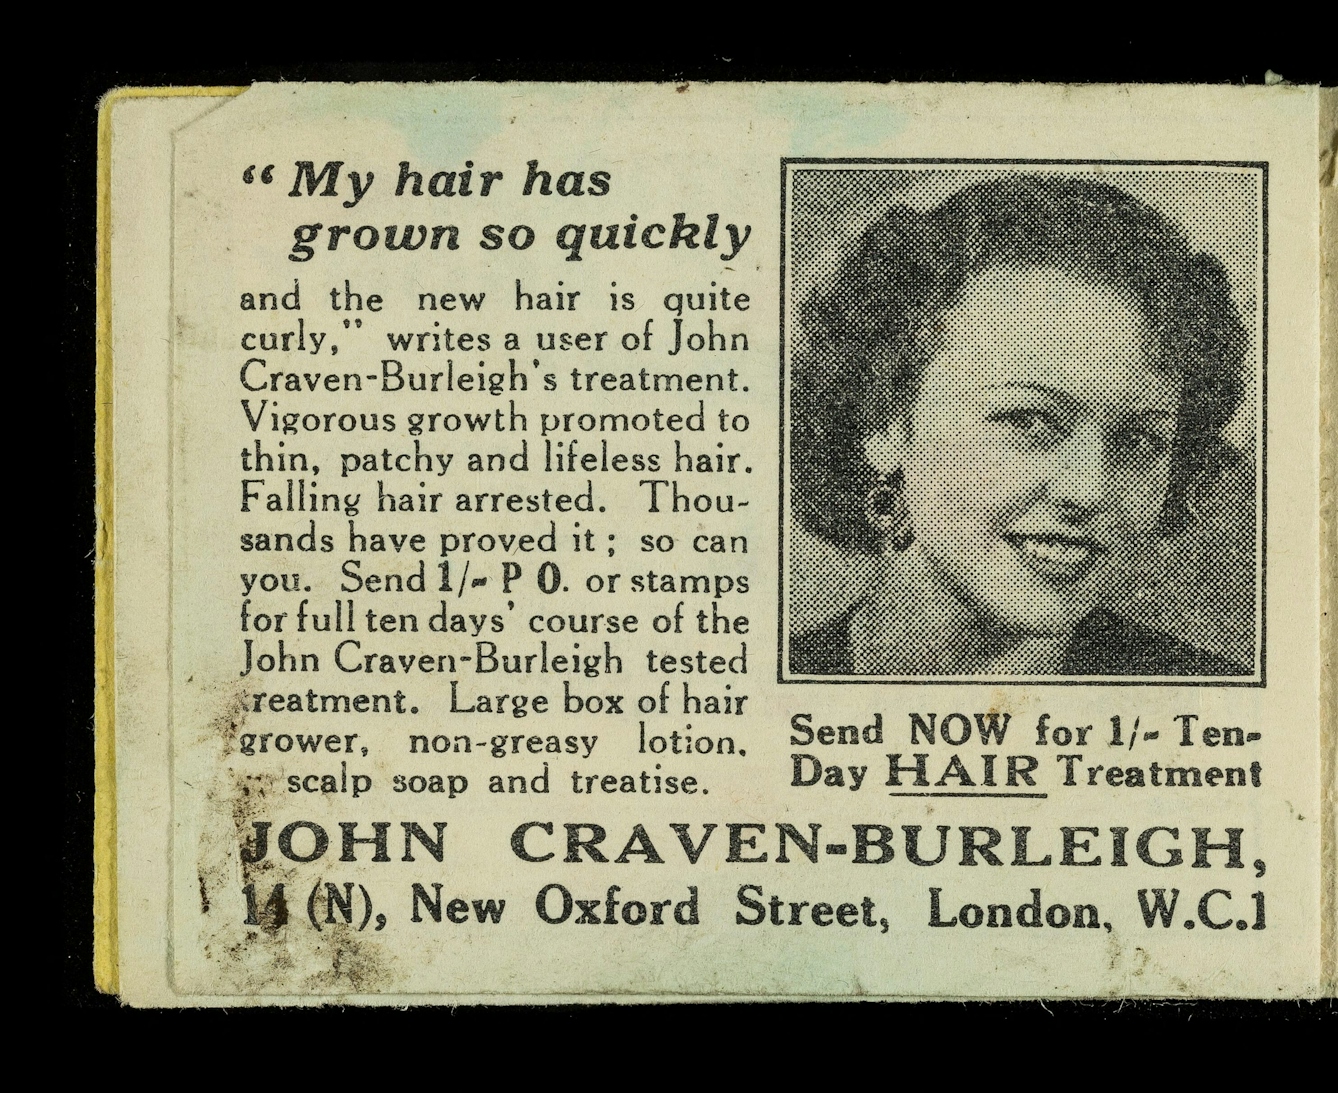 Page from a booklet of UK postage stamps (all used in this instance) with an advertisement for hair treatment.  The advertisement features a black-and-white photograph of a woman's head and shoulders in three-quarter profile.  She has a thick head of curly hair.  The accompanying text reads: '"My hair has grown so quickly and the new hair is quite curly," writes a user of John Craven-Burleigh's treatment.  Vigorous growth promoted to thin, patchy and lifeless hair.  Falling hair arrested.  Thousands have proved it; so can you. Send 1/- P O. or stamps for full ten days' course of the John Craven-Burleigh tested treatment.  Large box of hair grower, non-greasy lotion, scalp soap and treatise.  Send NOW for 1/- Ten-day HAIR Treatment.  JOHN CRAVEN-BURLEIGH, 14 (N), New Oxford Street, London, W.C.1'.